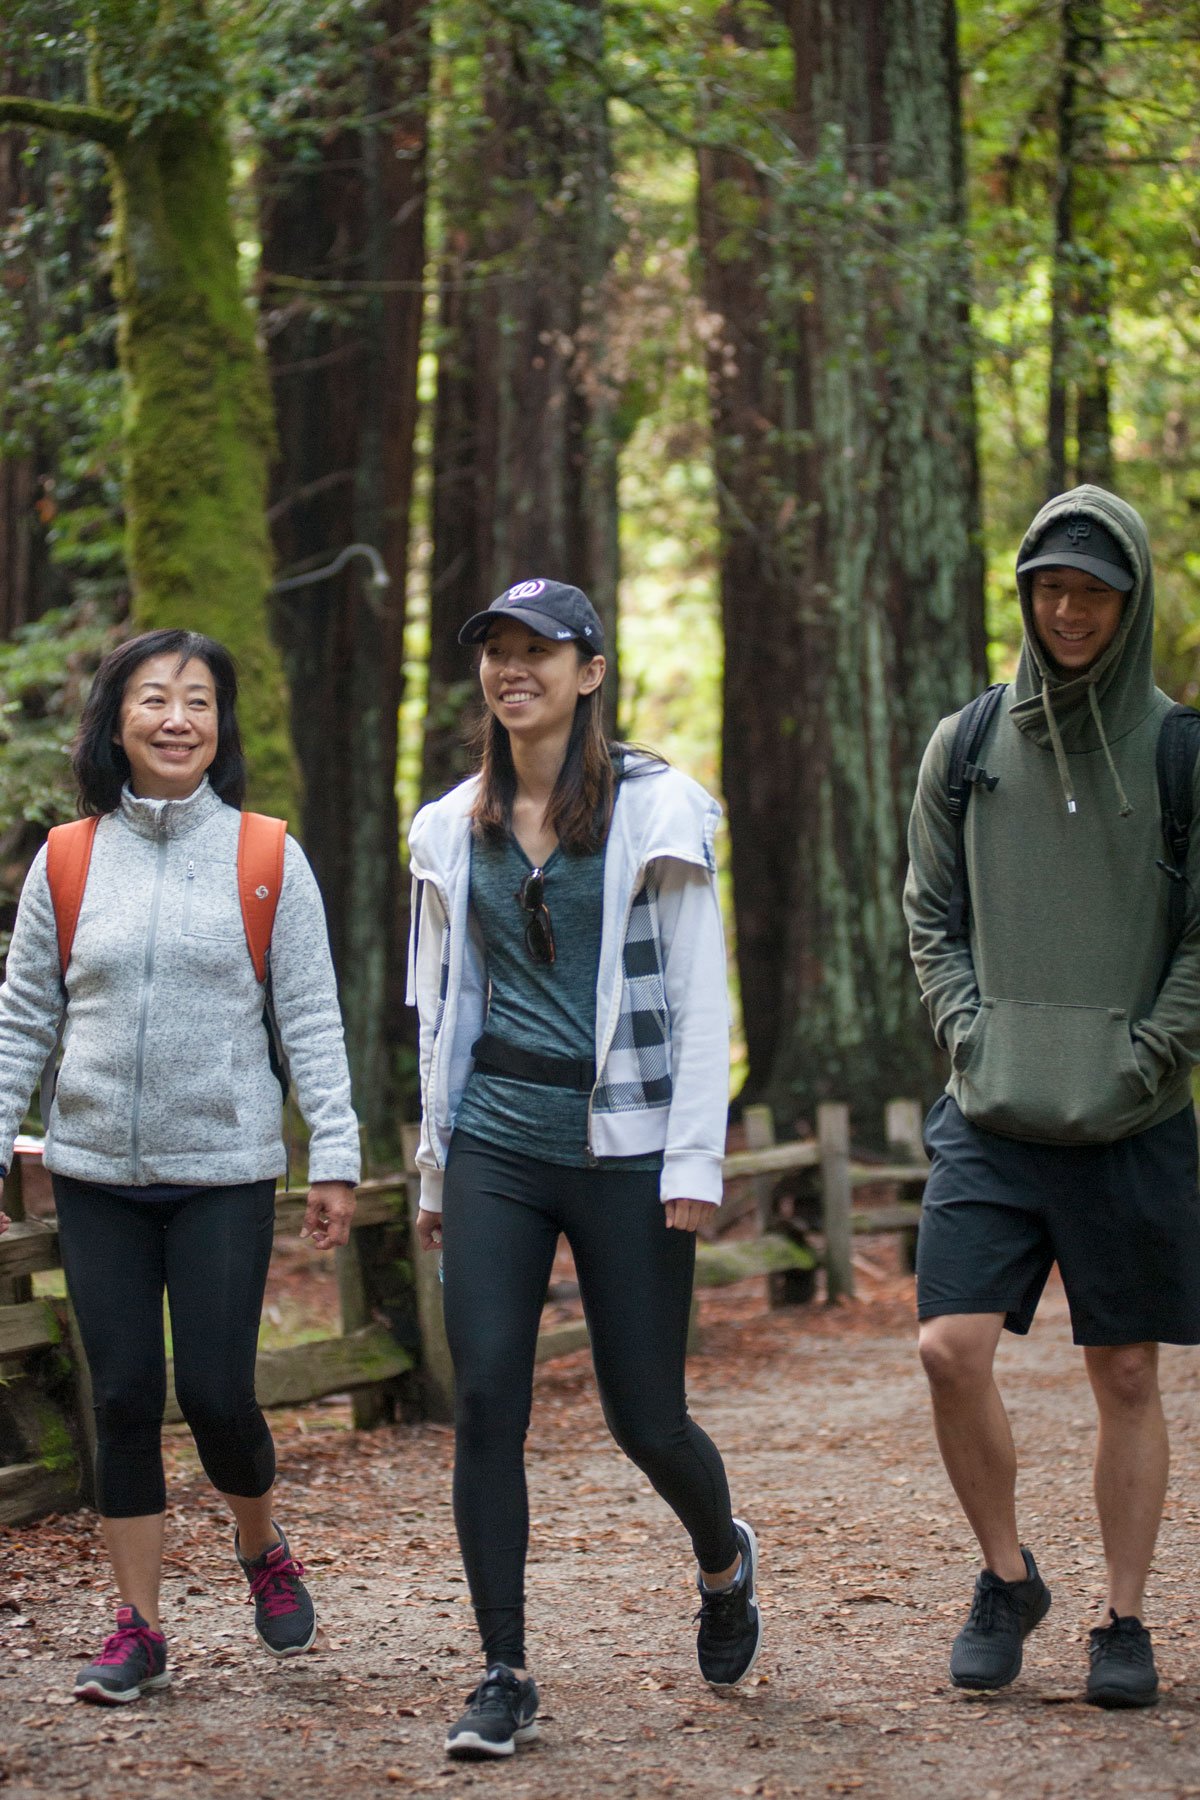 An older woman, a young woman, and a young man, all of asian descent, walk through the redwoods with smiles on their faces.